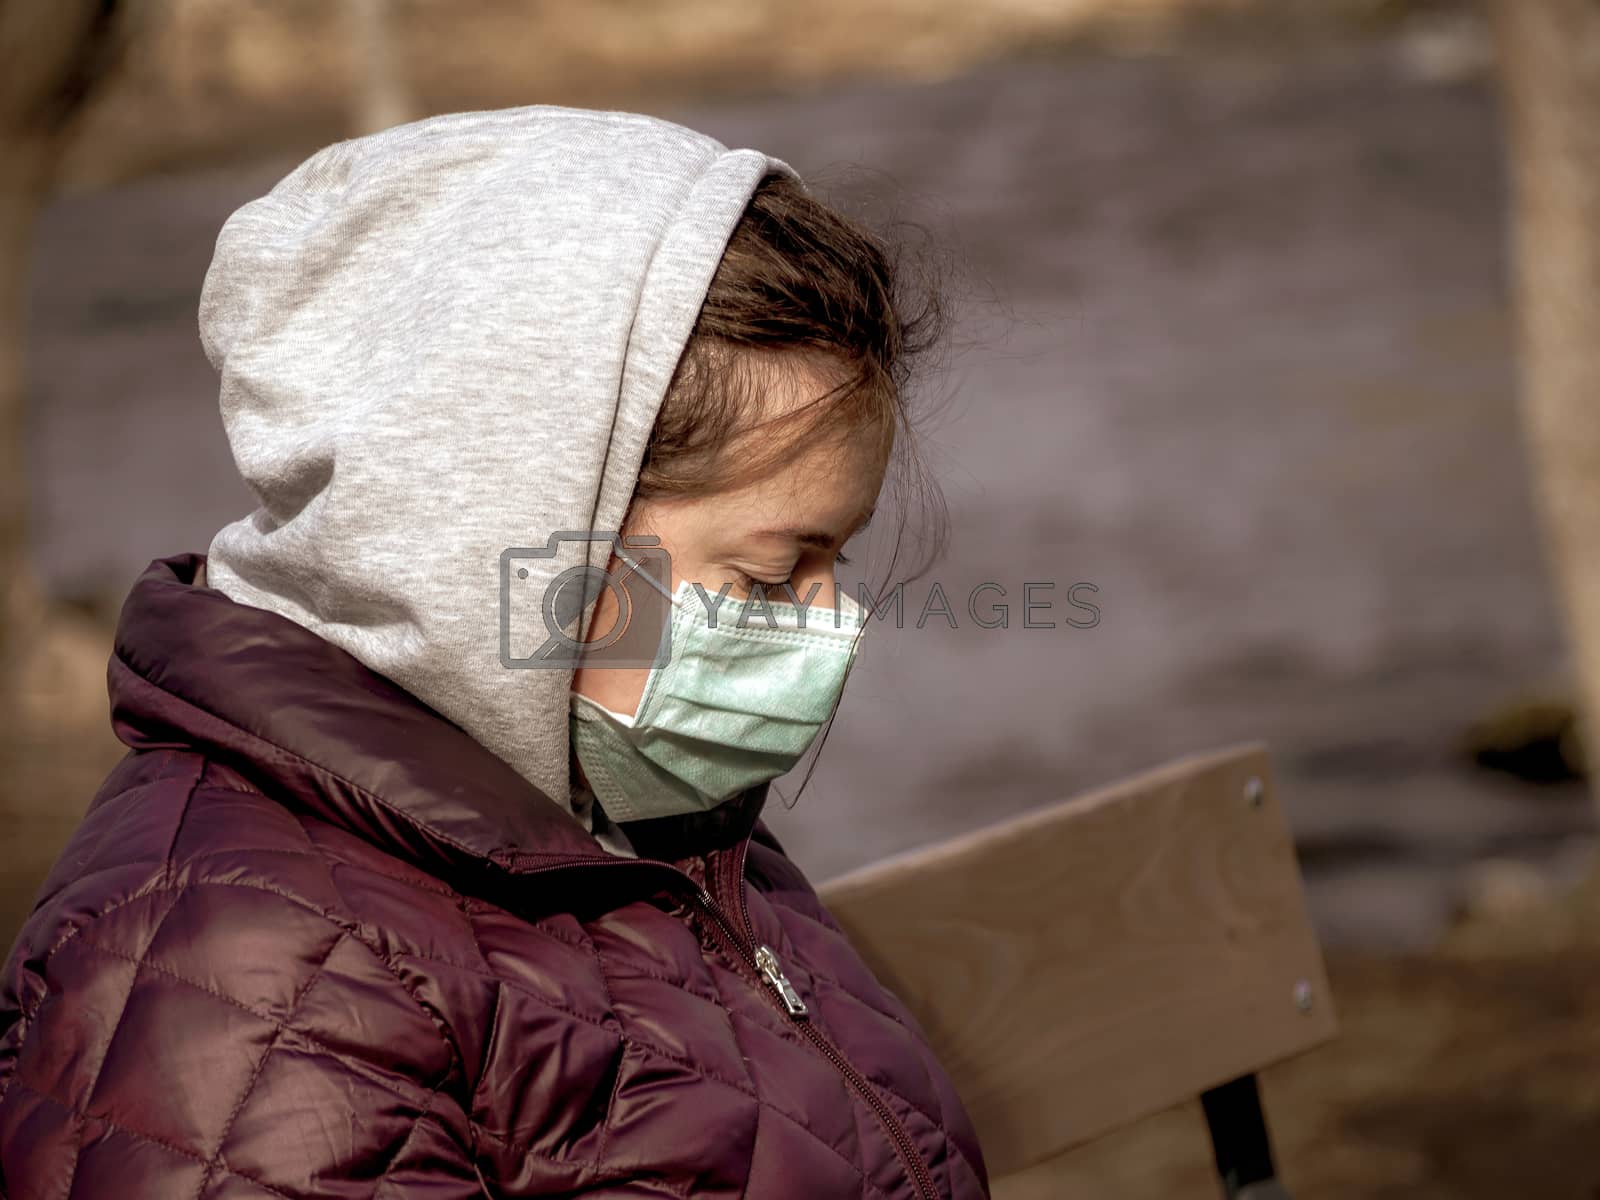 Royalty free image of woman and Coronavirus protection by Dimidov27@mail.ru